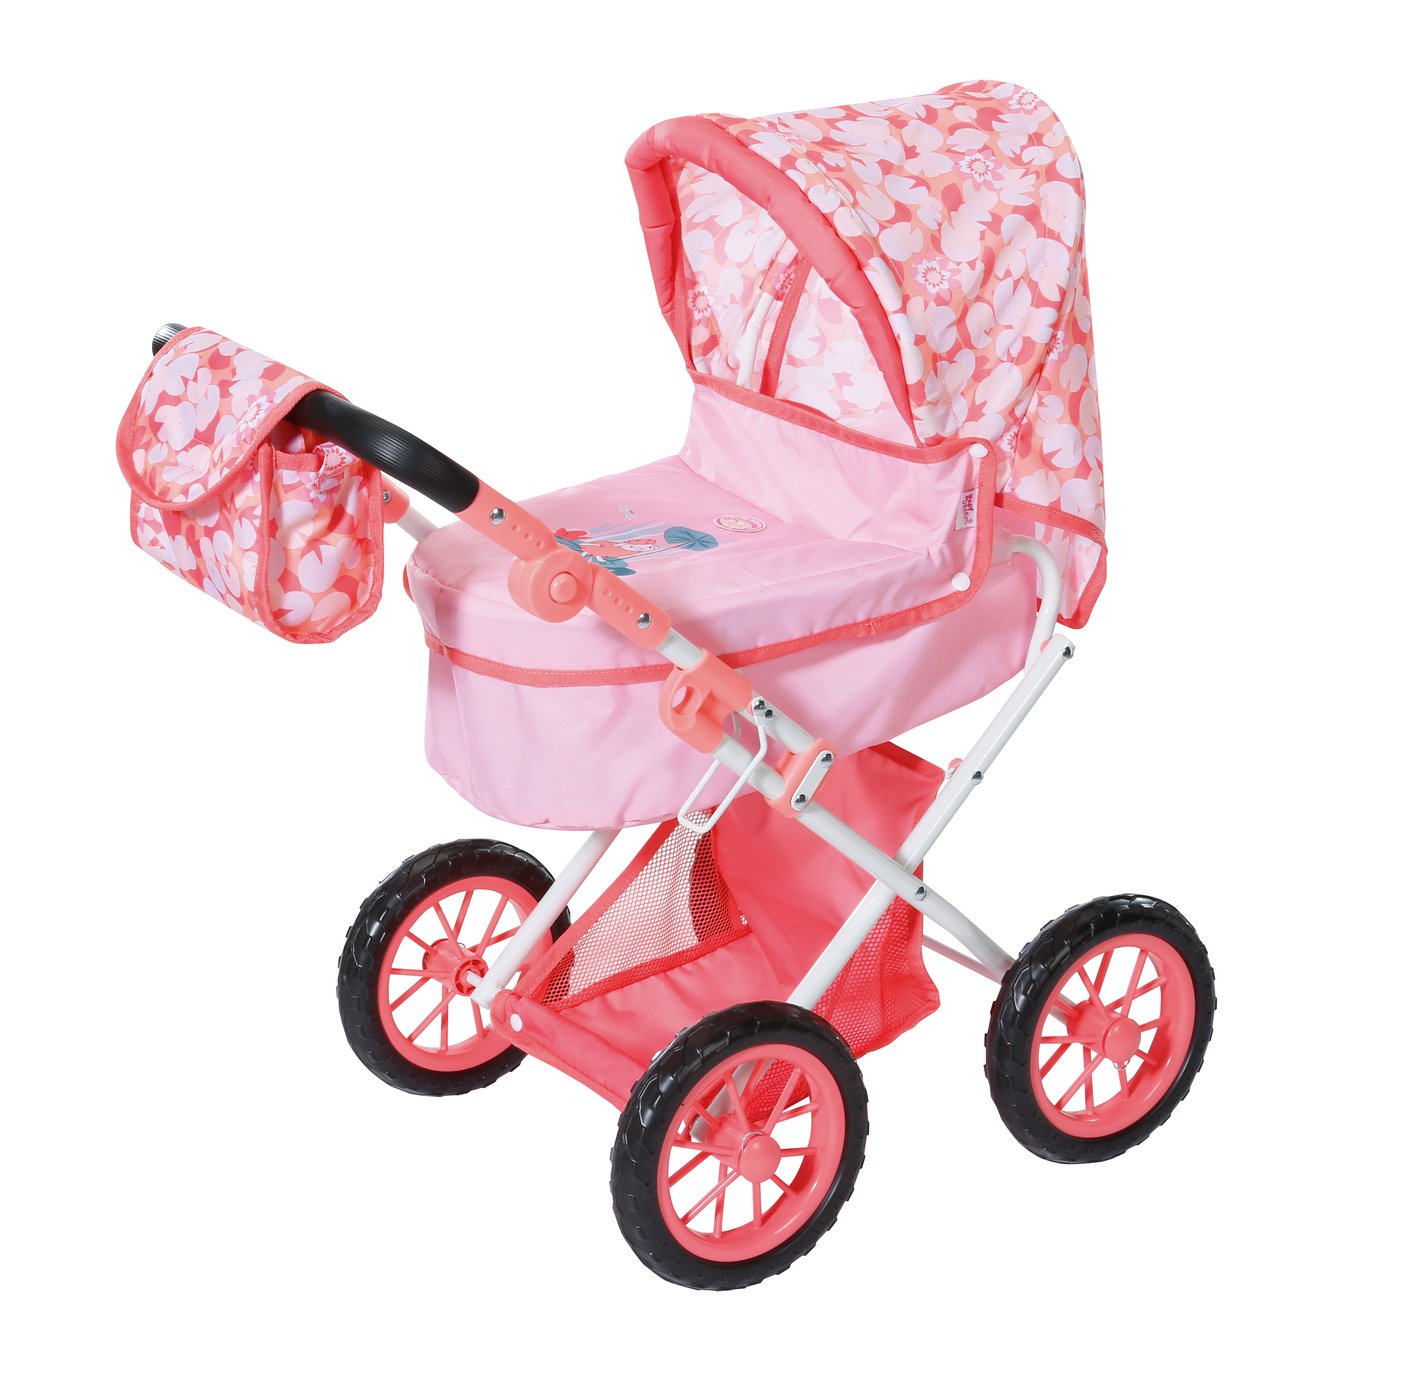 Baby Annabell Active Dolls Pram Review